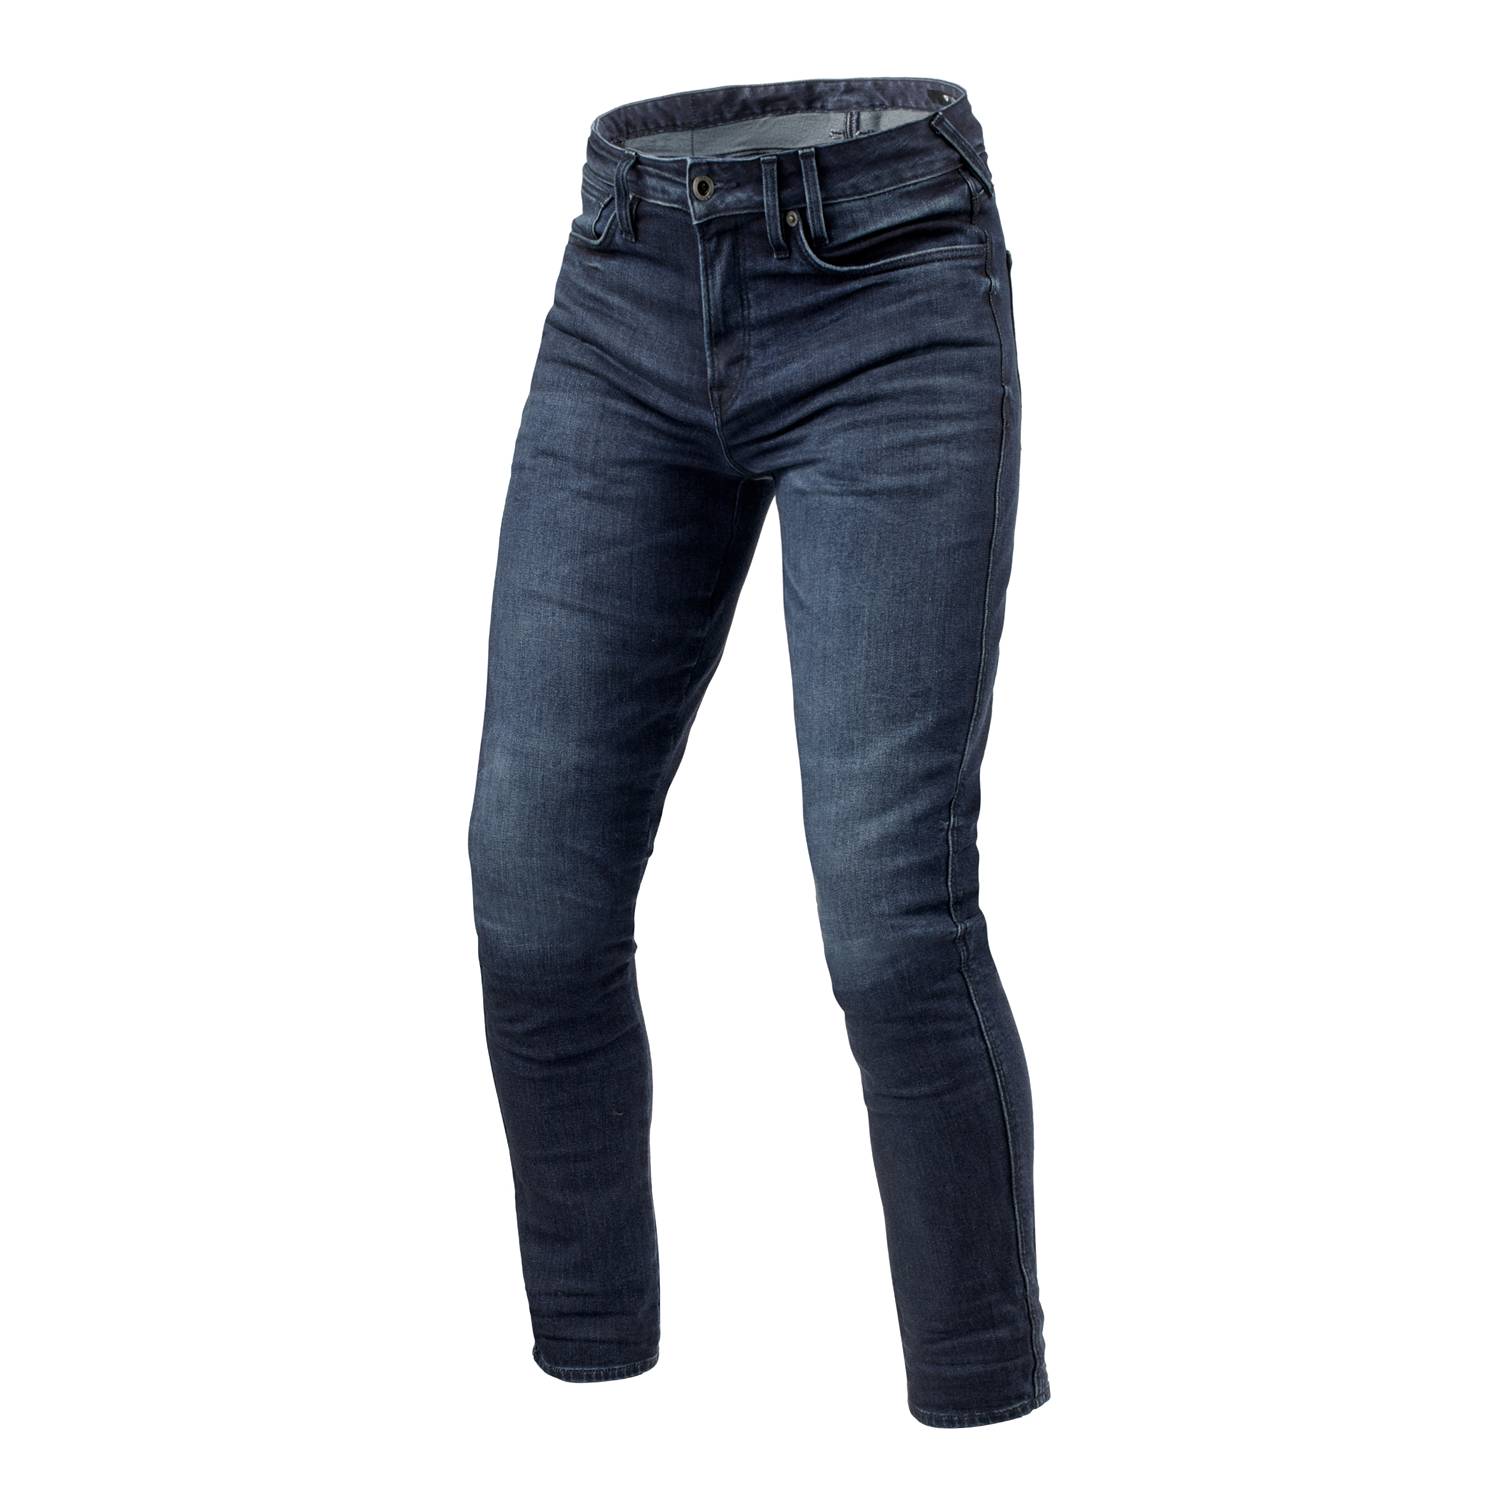 Image of EU REV'IT! Jeans Carlin SK Dark Blue Used L32 Motorcycle Jeans Taille L32/W31